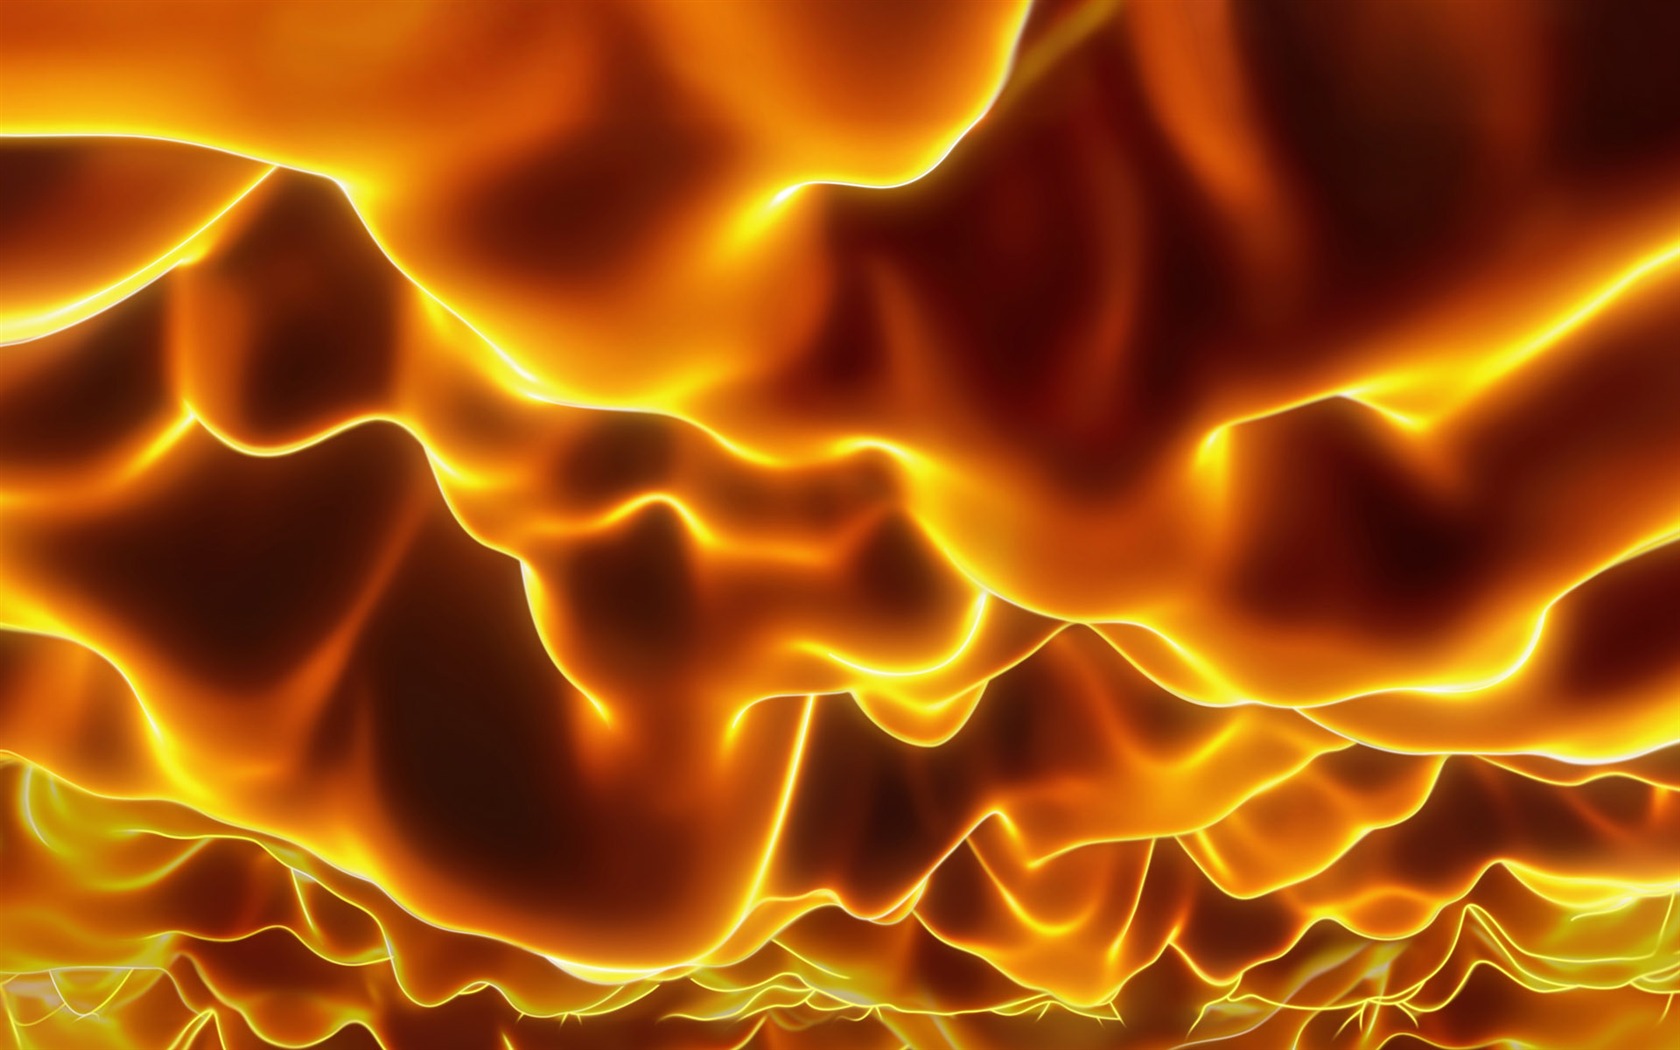 Flame Feature HD Wallpaper #4 - 1680x1050